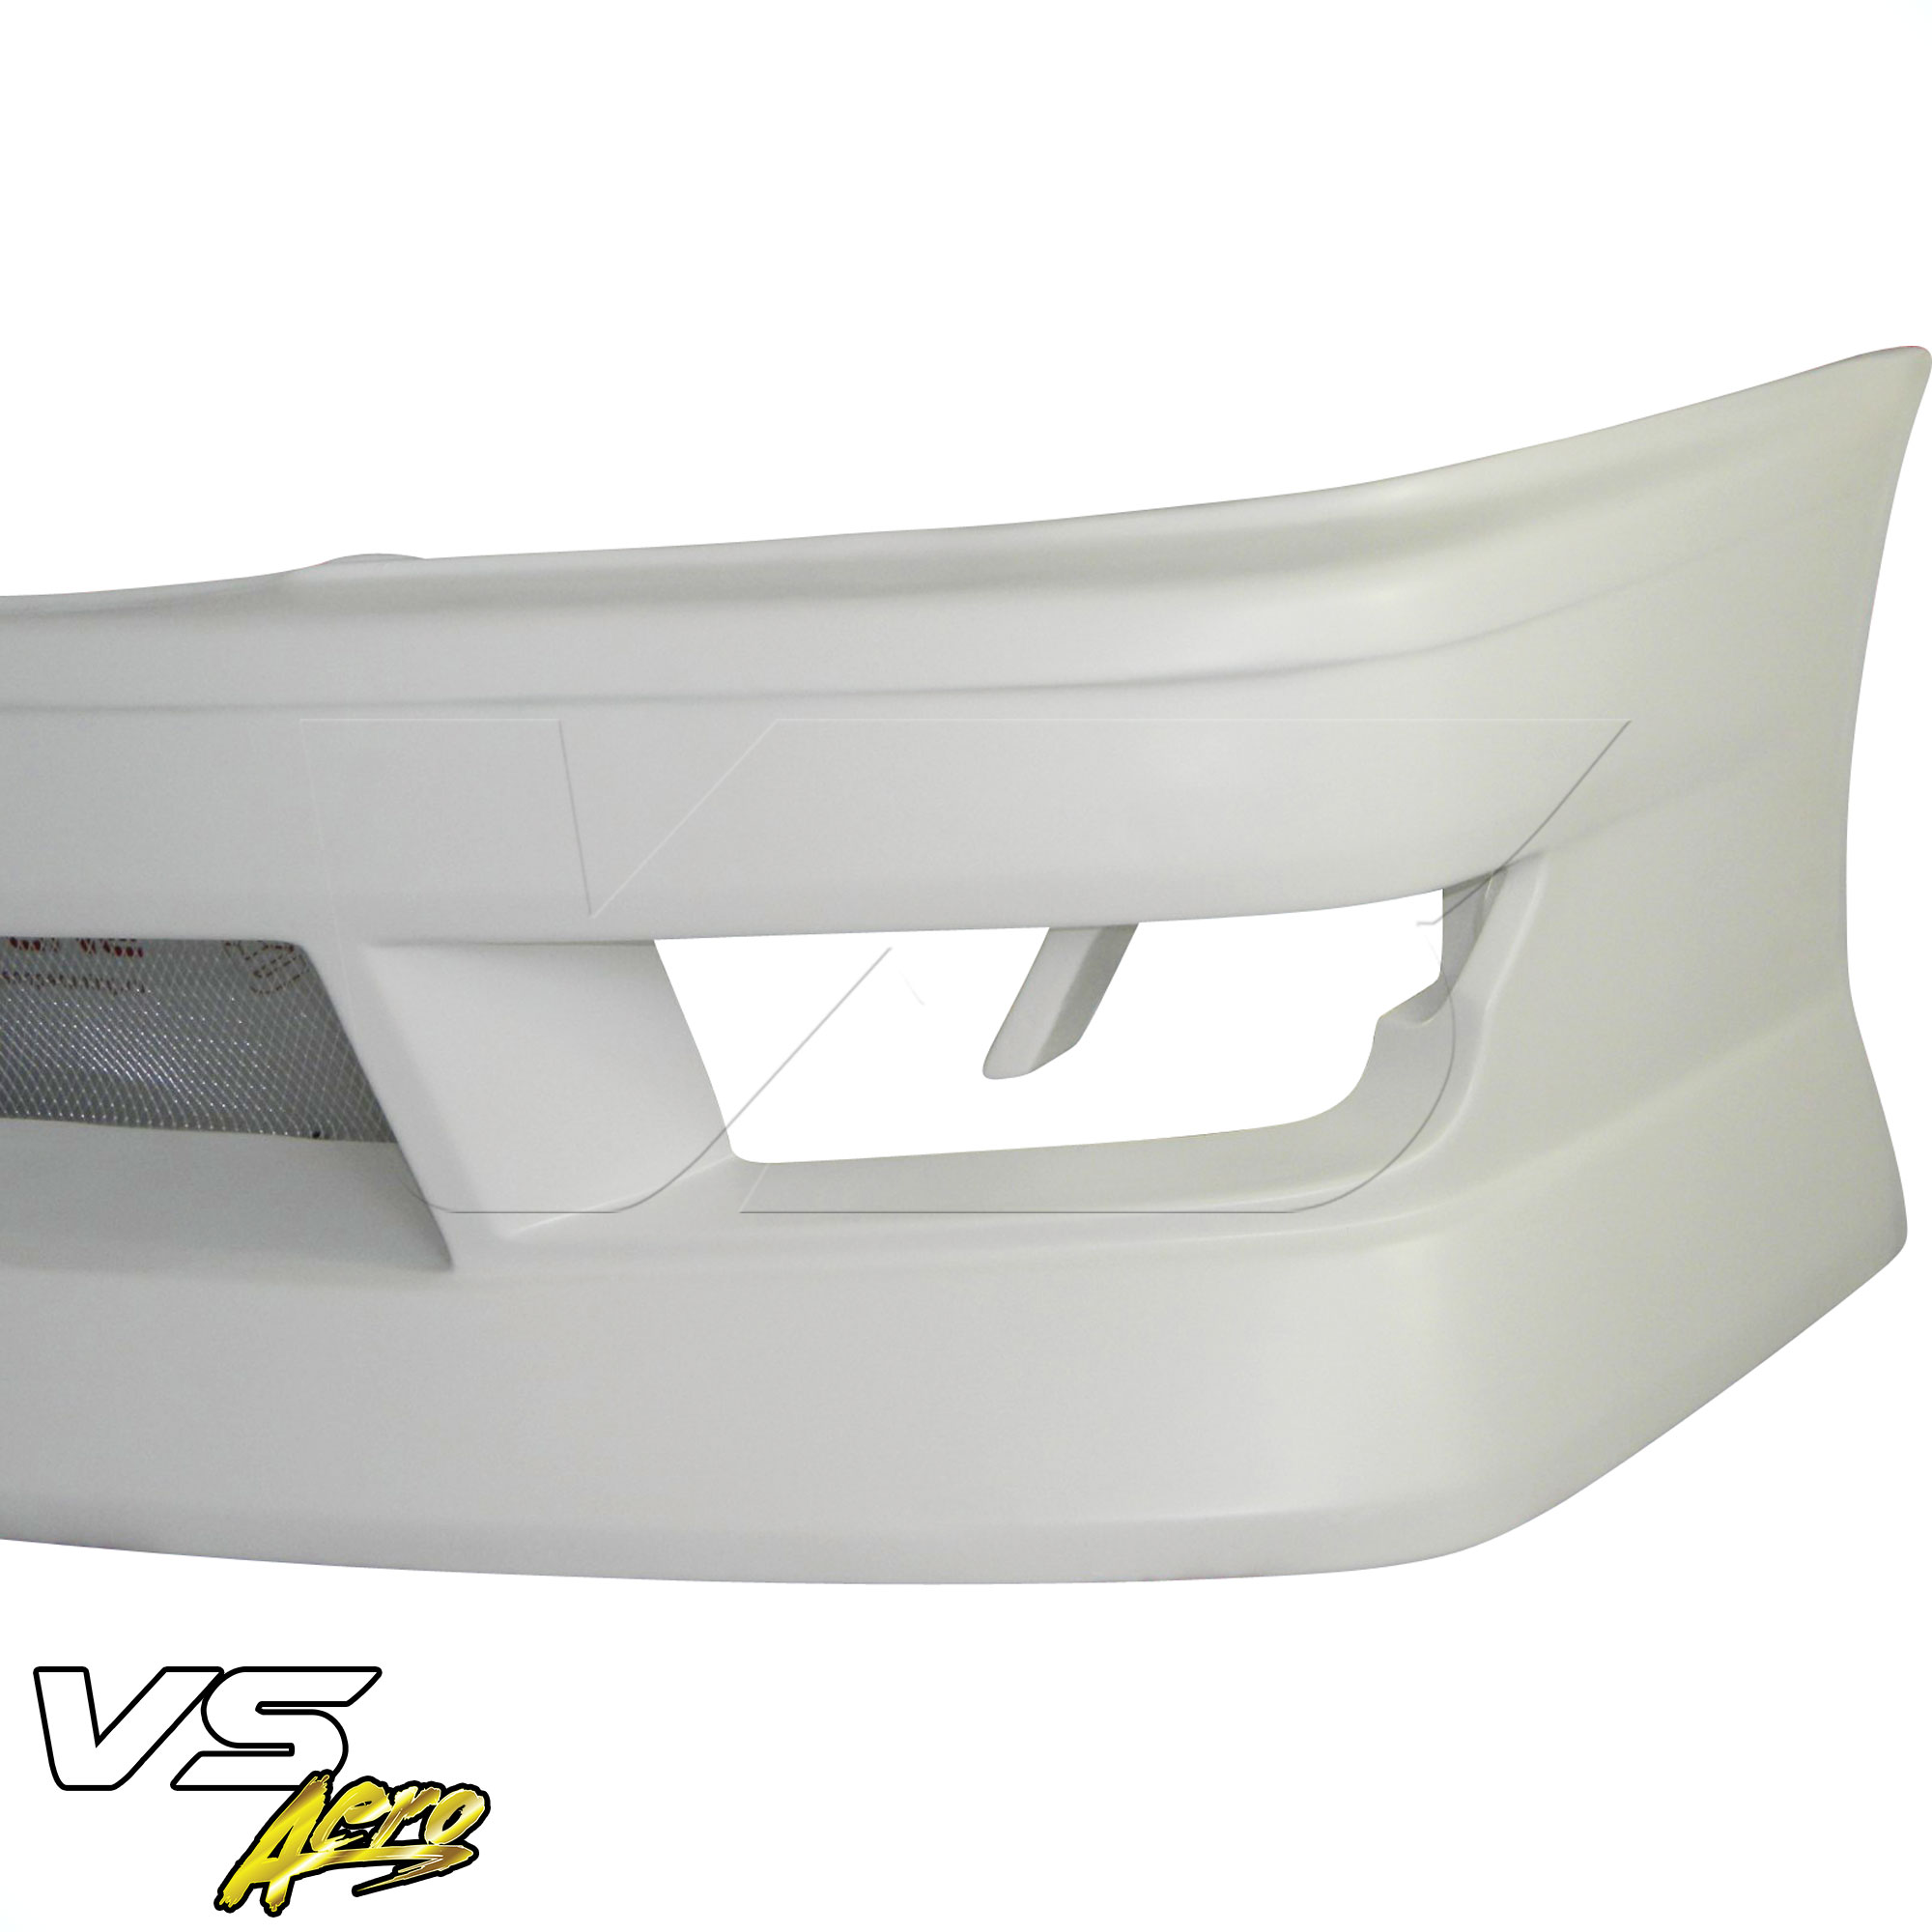 VSaero FRP BSPO Front Bumper > Toyota Chaser JZX100 1996-2000 - Image 14